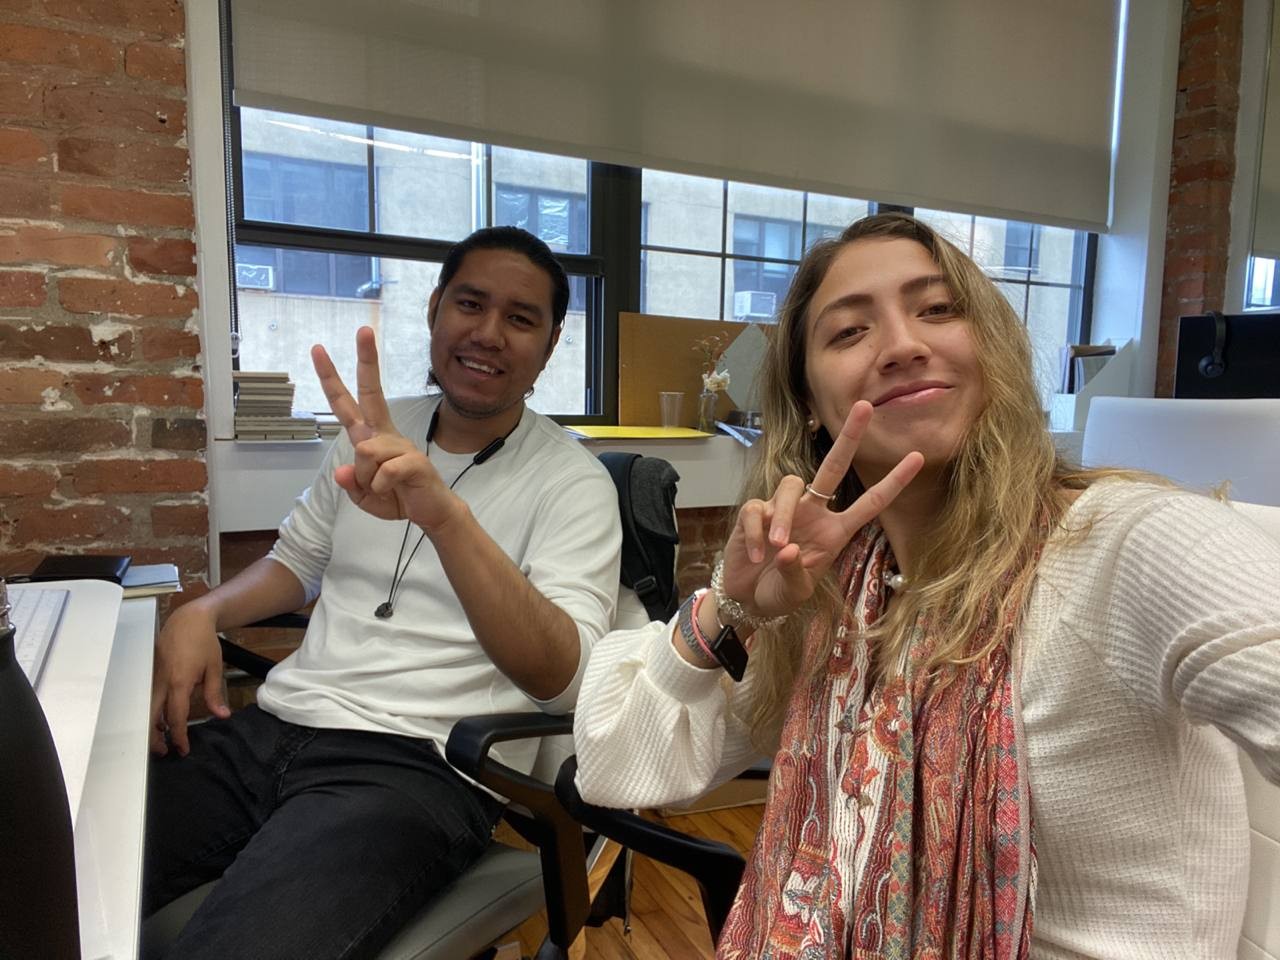 Our designers, Mayra and Juan, are enjoying the work day together. 